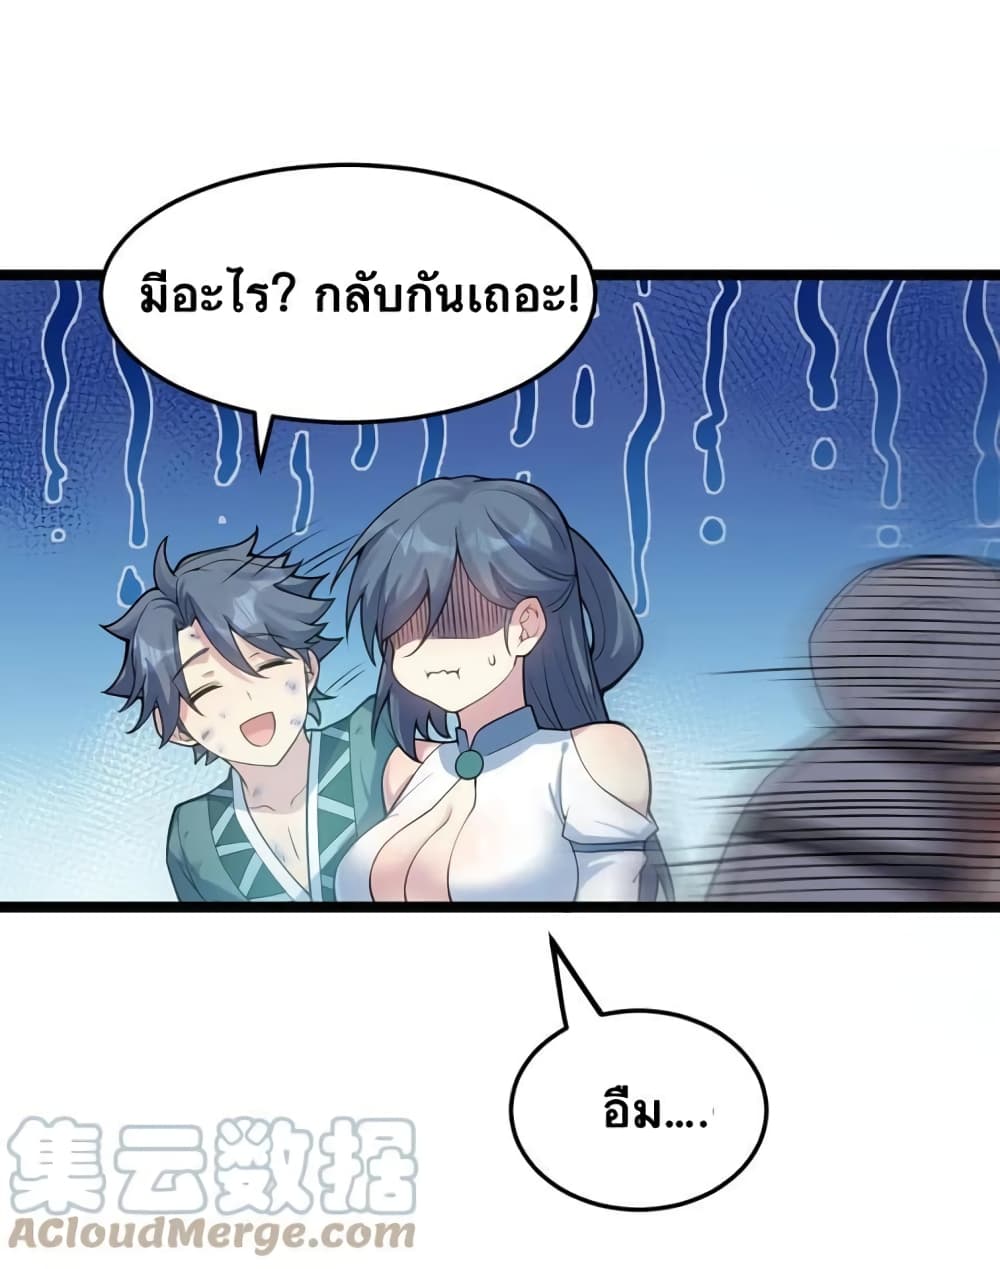 Godsian Masian from Another World 92 แปลไทย